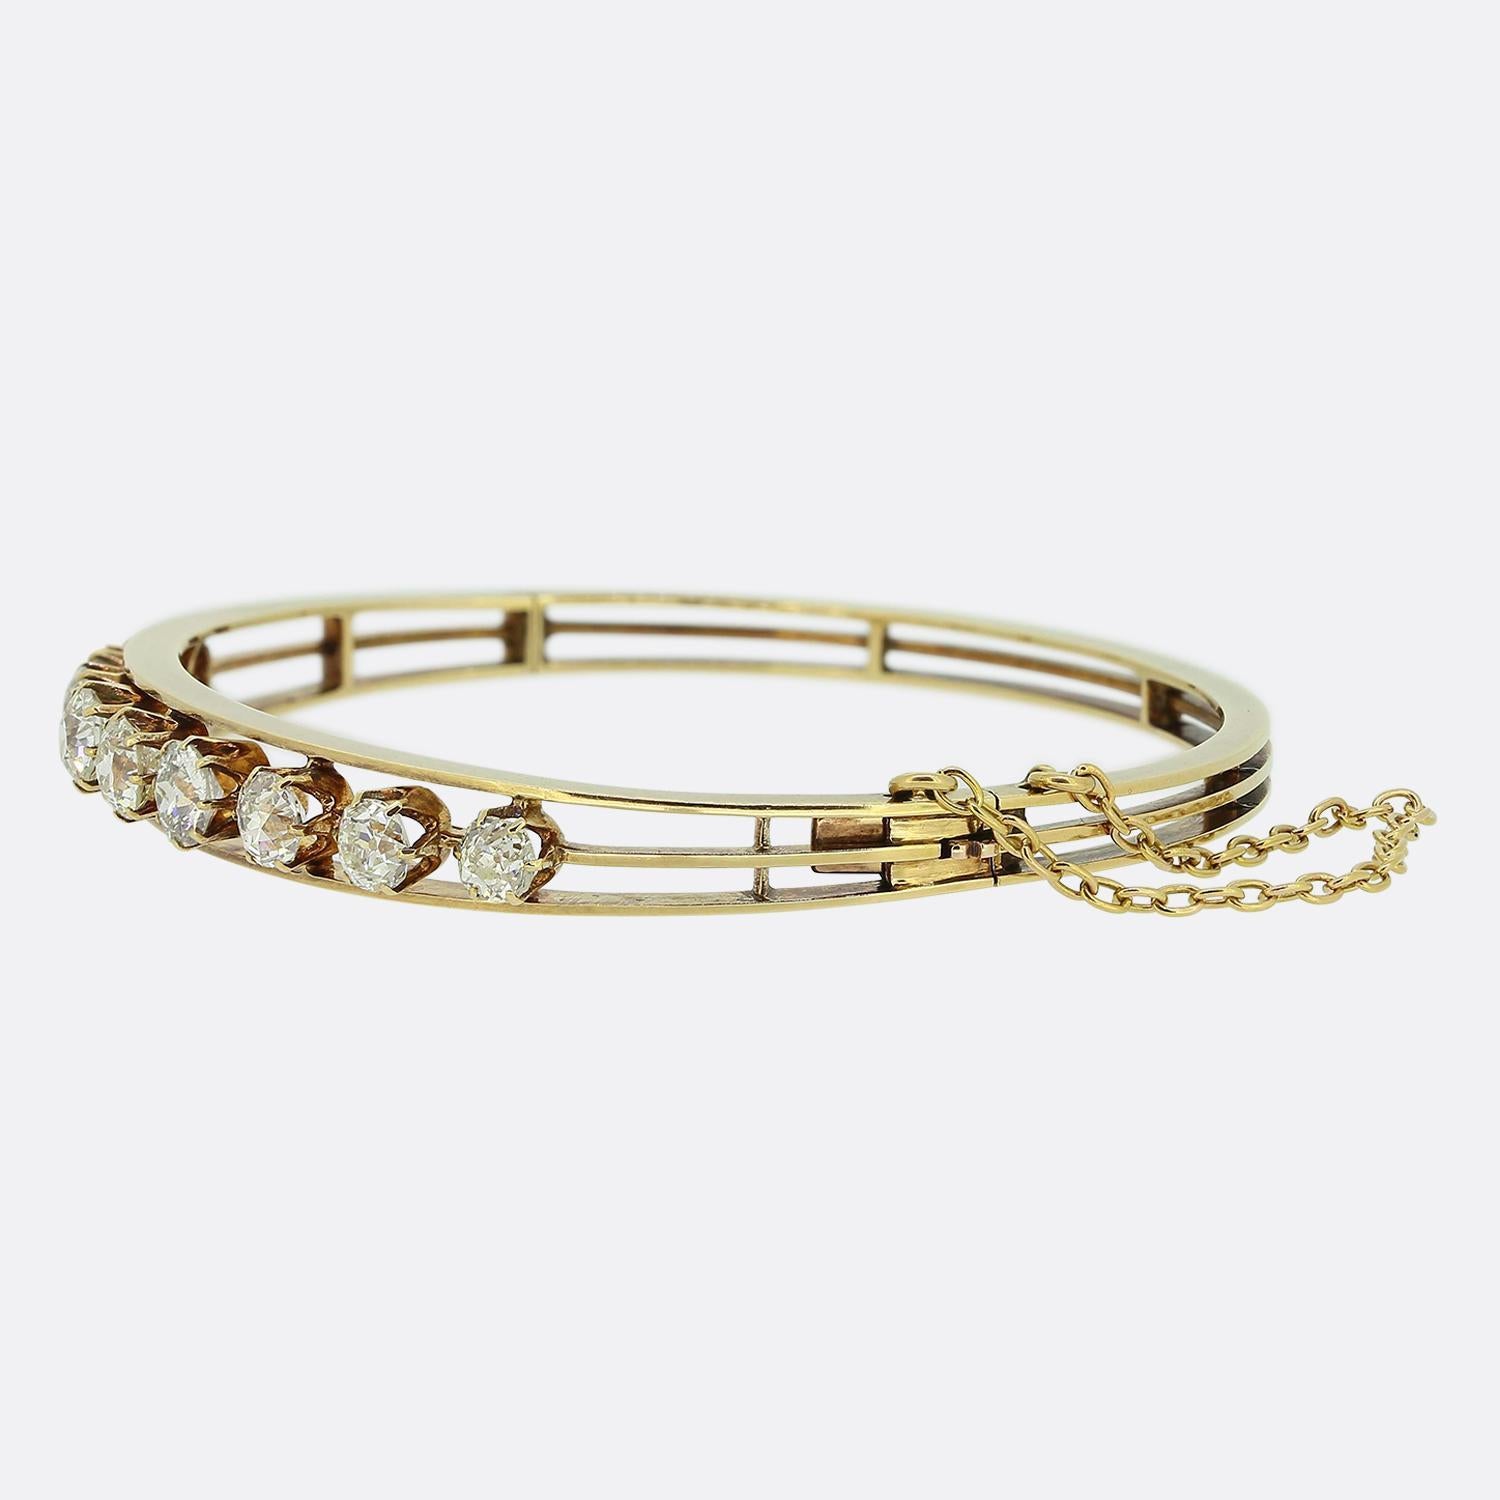 Here we have a marvellous diamond bracelet dating back to the Victorian era. This antique piece has been crafted from a warm 15ct yellow gold with a slight pinky tint and showcases an open design consisting of three horizontal bars which wrap neatly